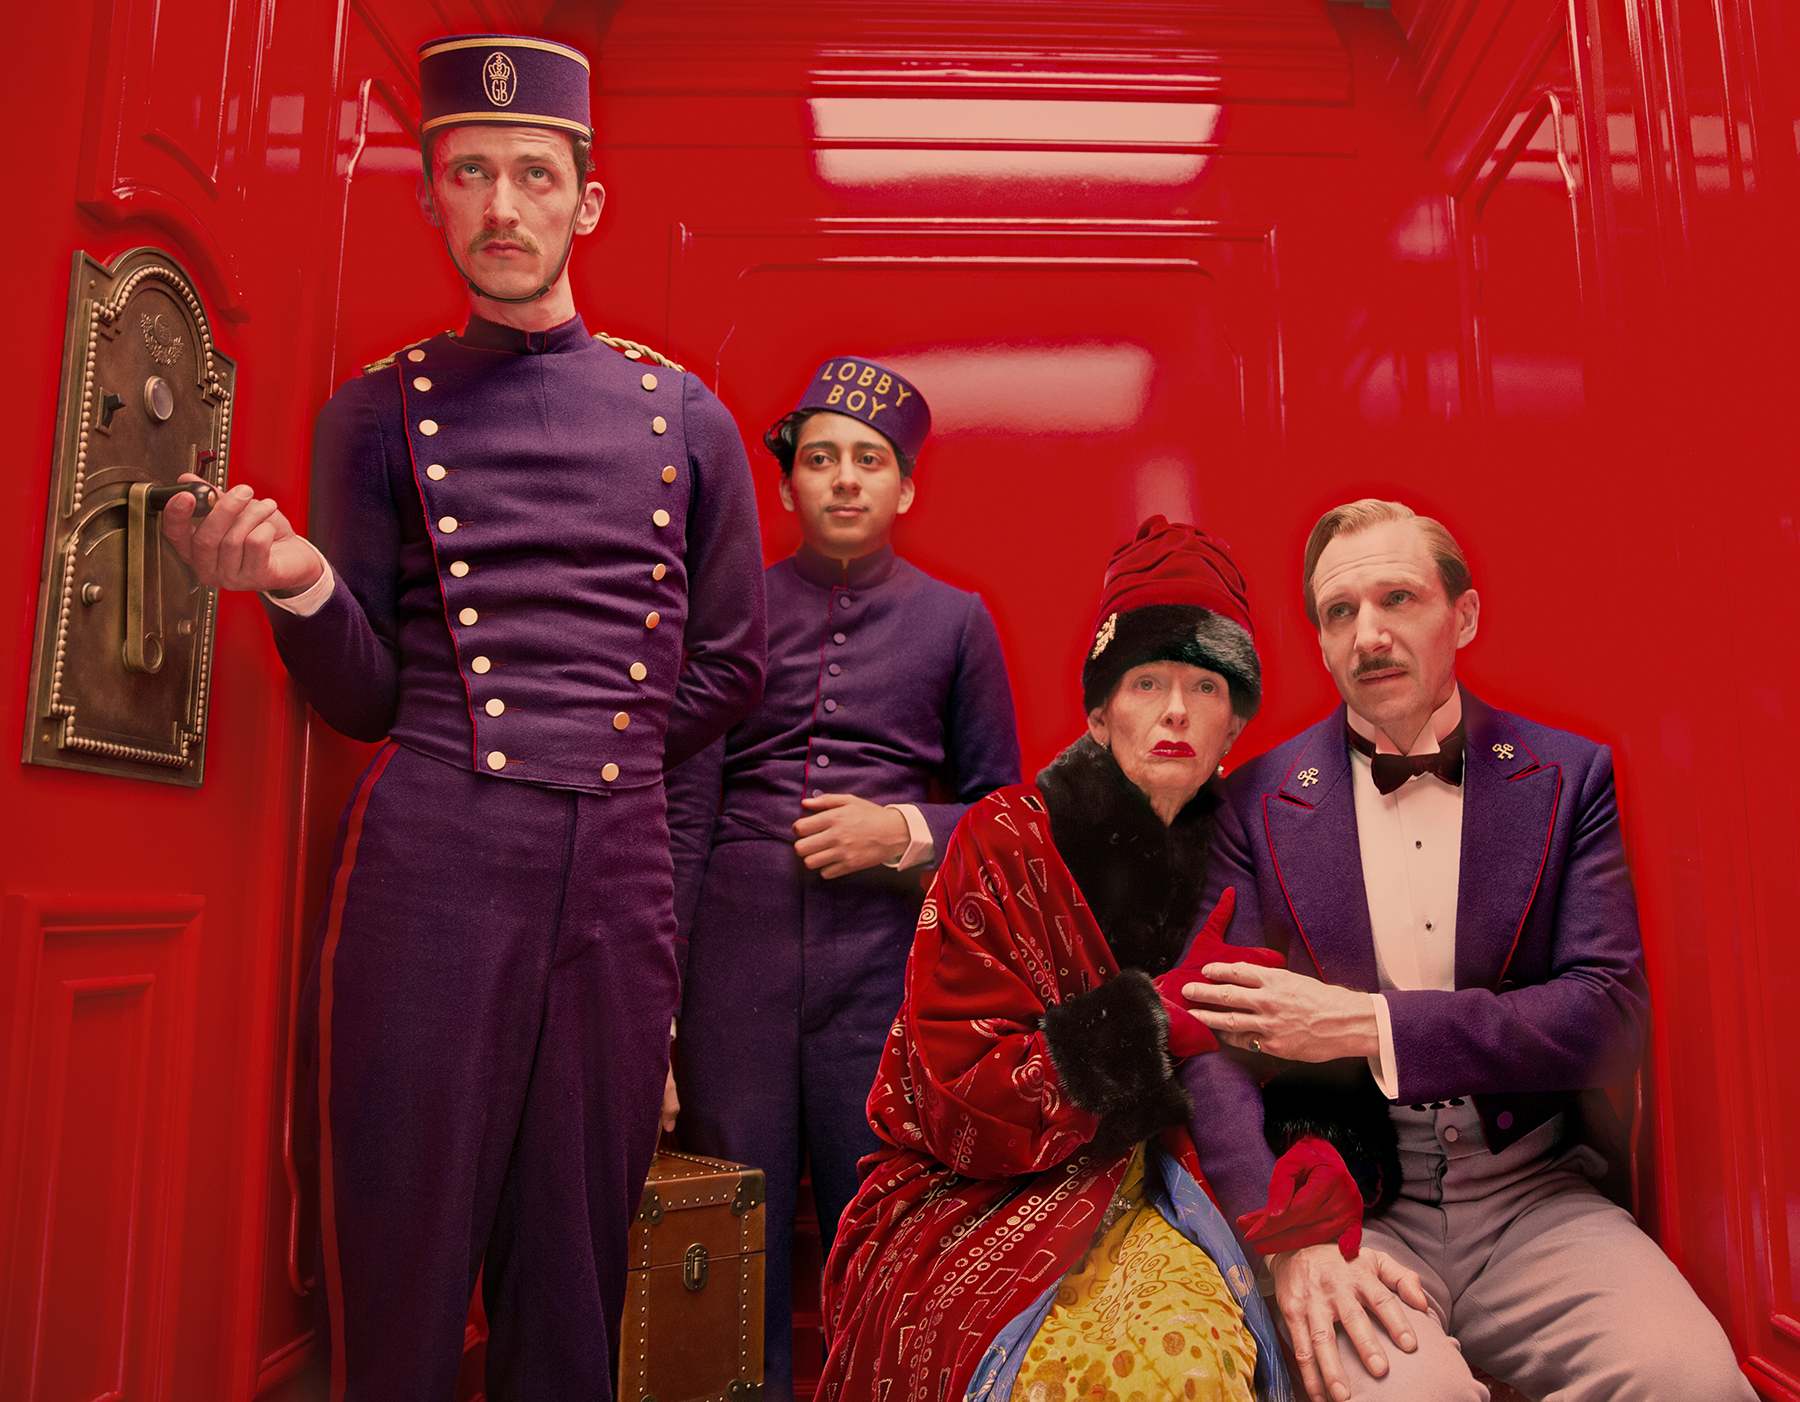 A scene from The Grand Budapest Hotel. (Credit: Fox Searchlight Pictures)